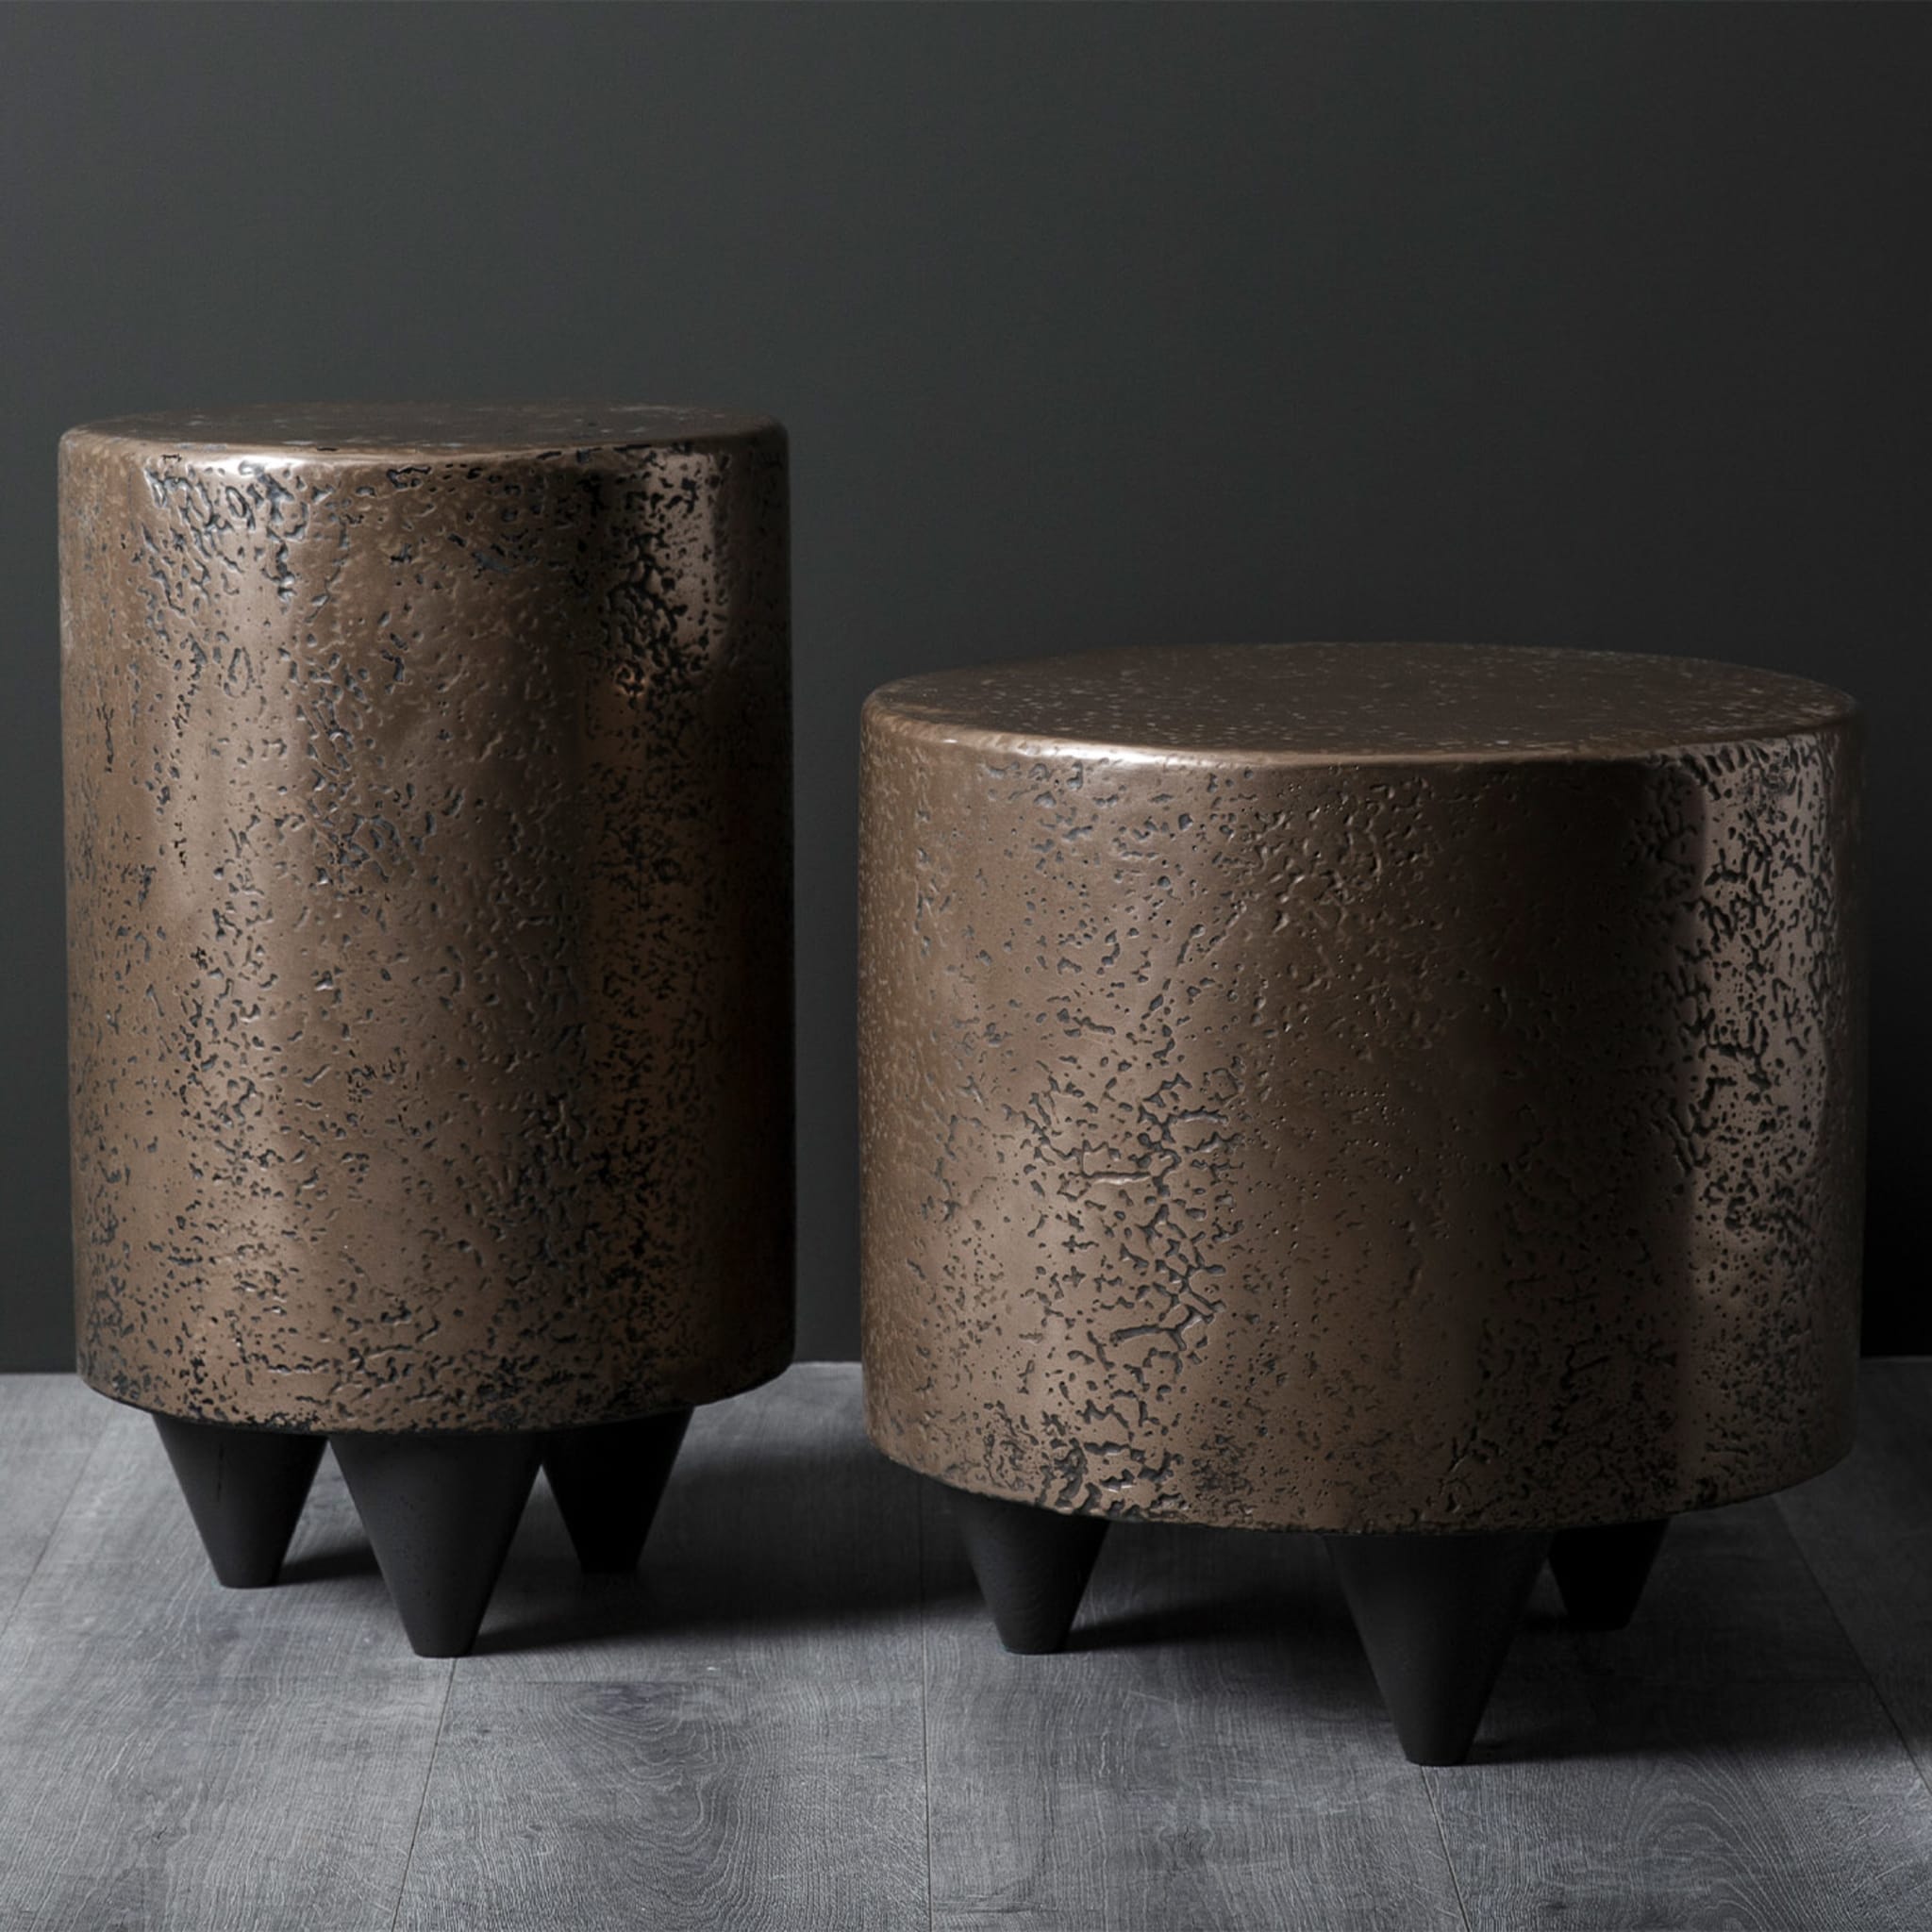 Low Bronze Pouf and Side Table #1 - Alternative view 1